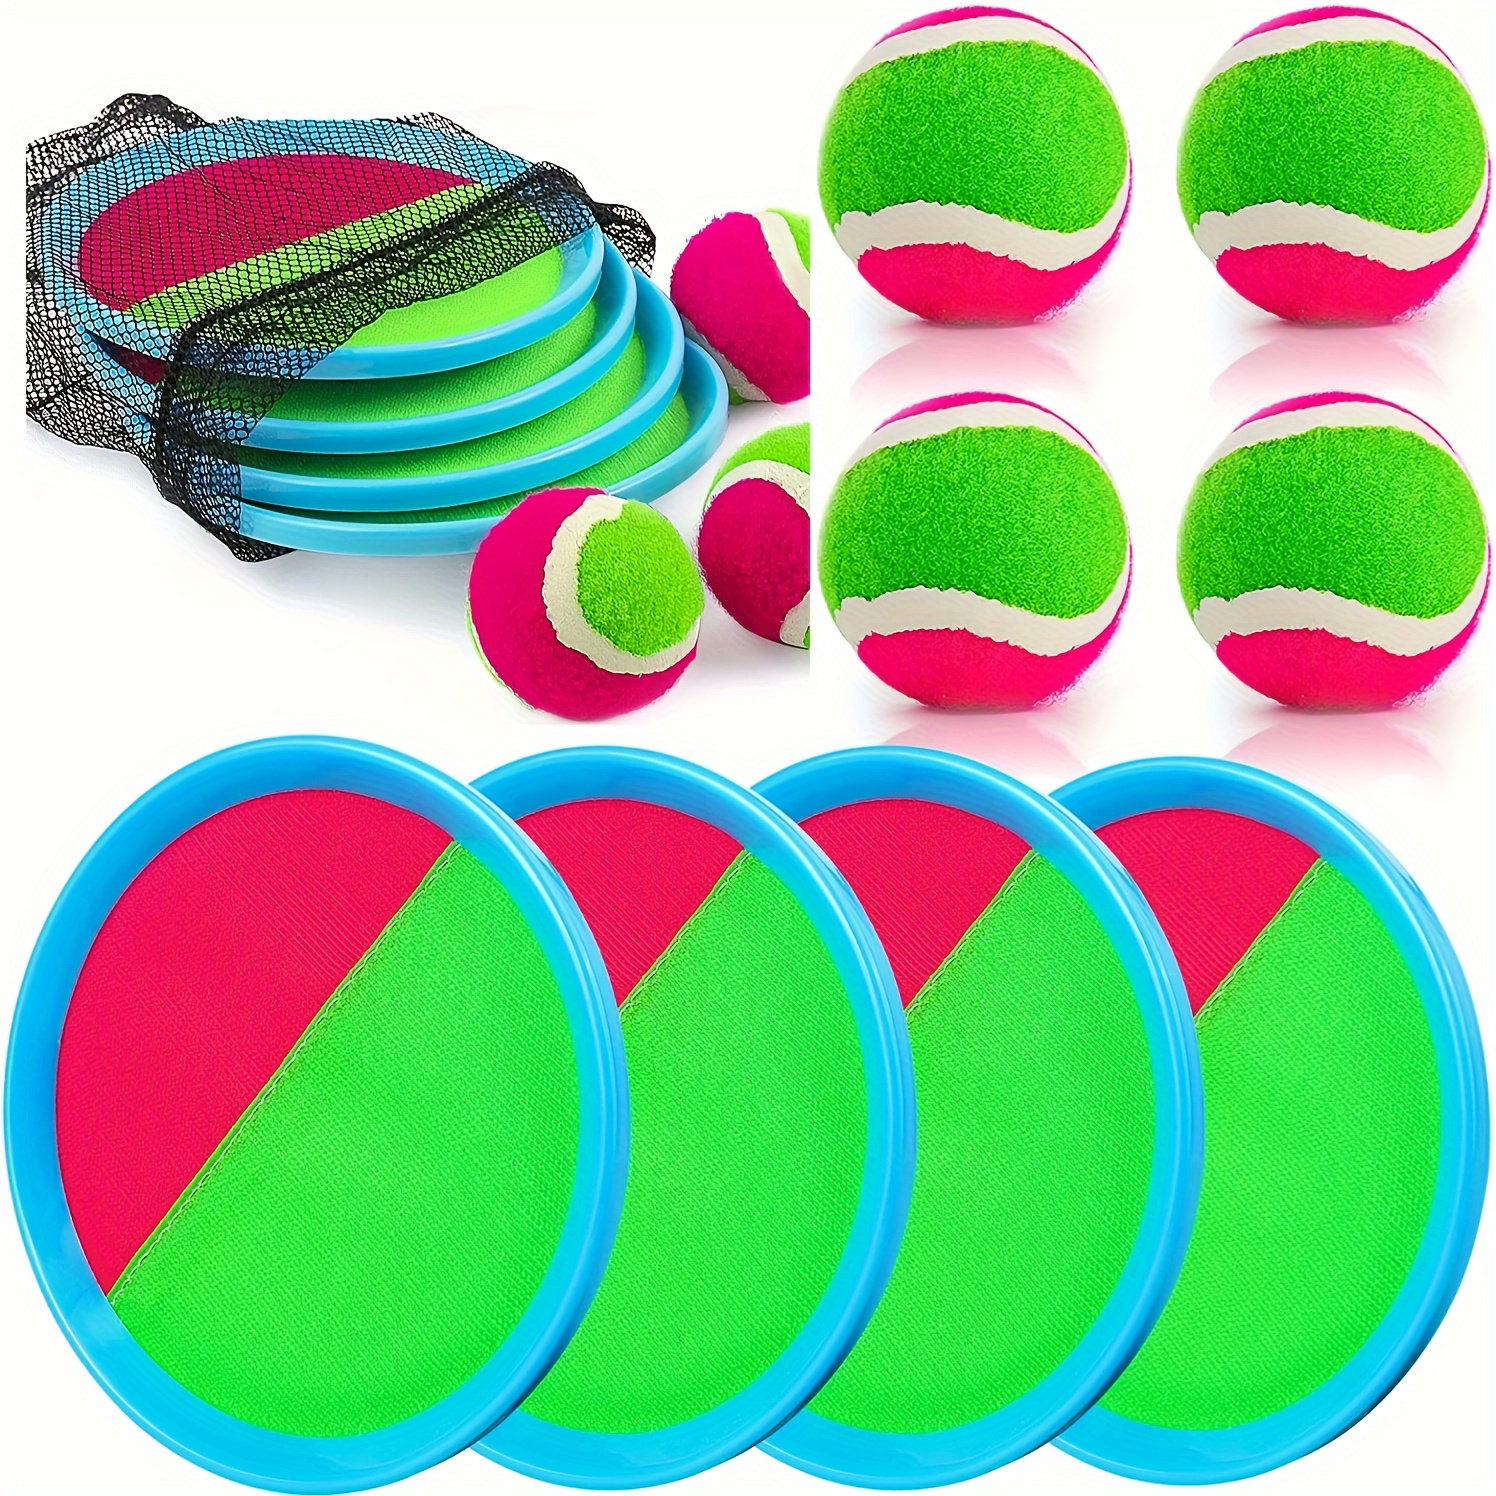 

Sticky Ball Game Set With 2 Paddles & 1 Sticky Ball, Portable For Beach, Playground & Backyard Family Entertainment, Easter Gift